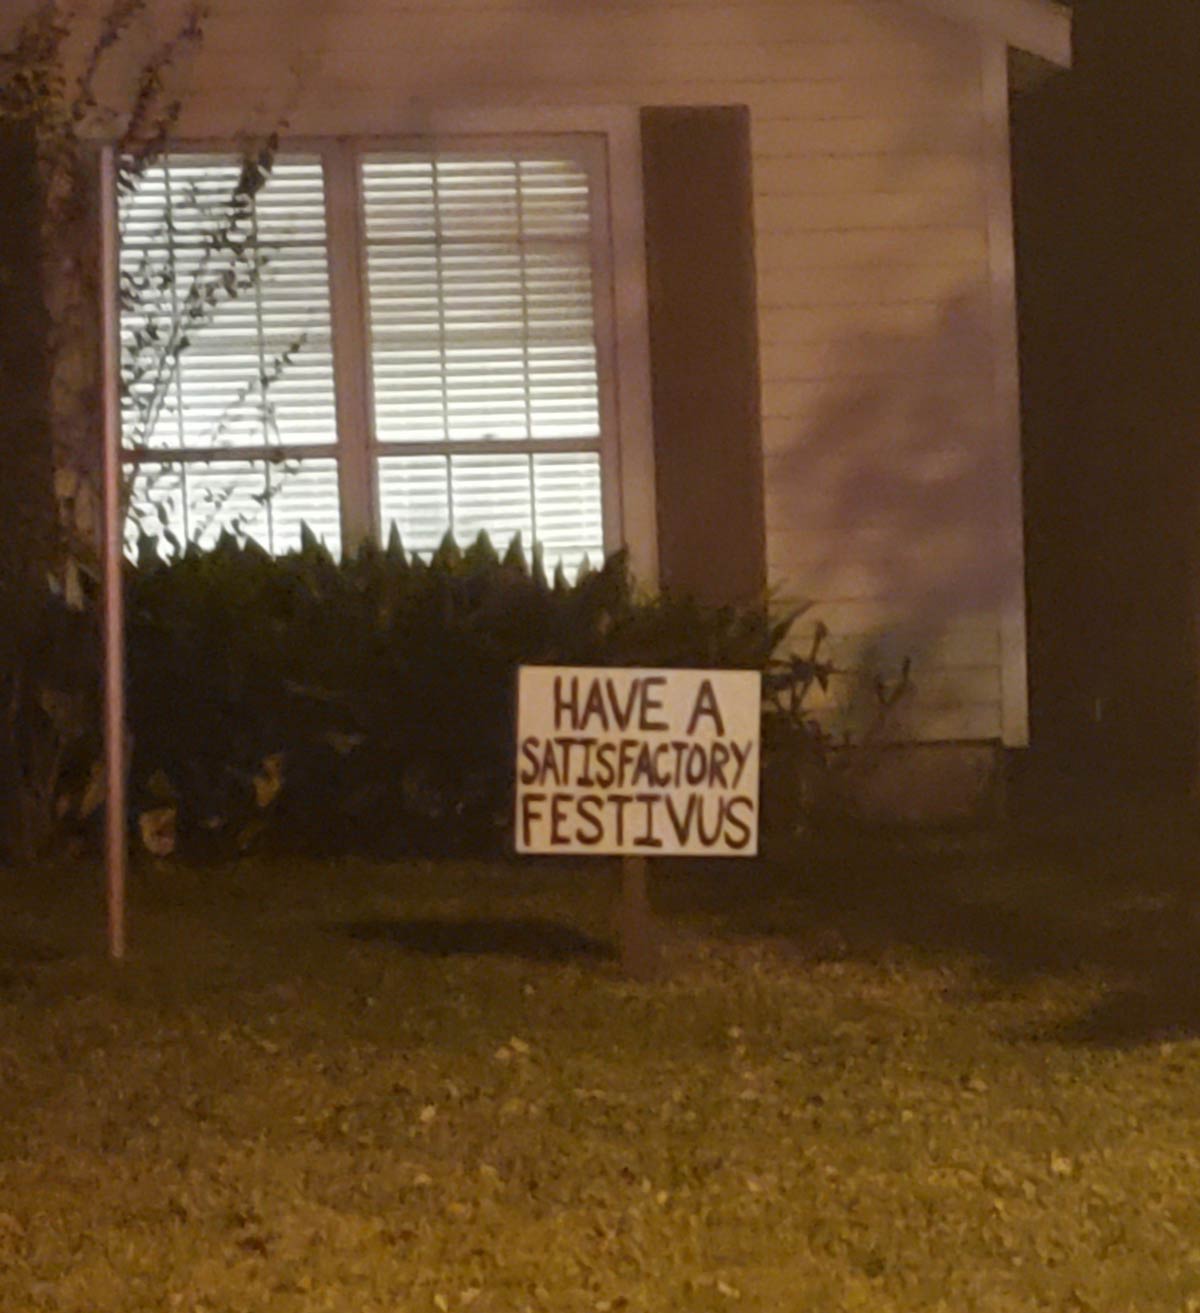 Best holiday decor I've seen this year